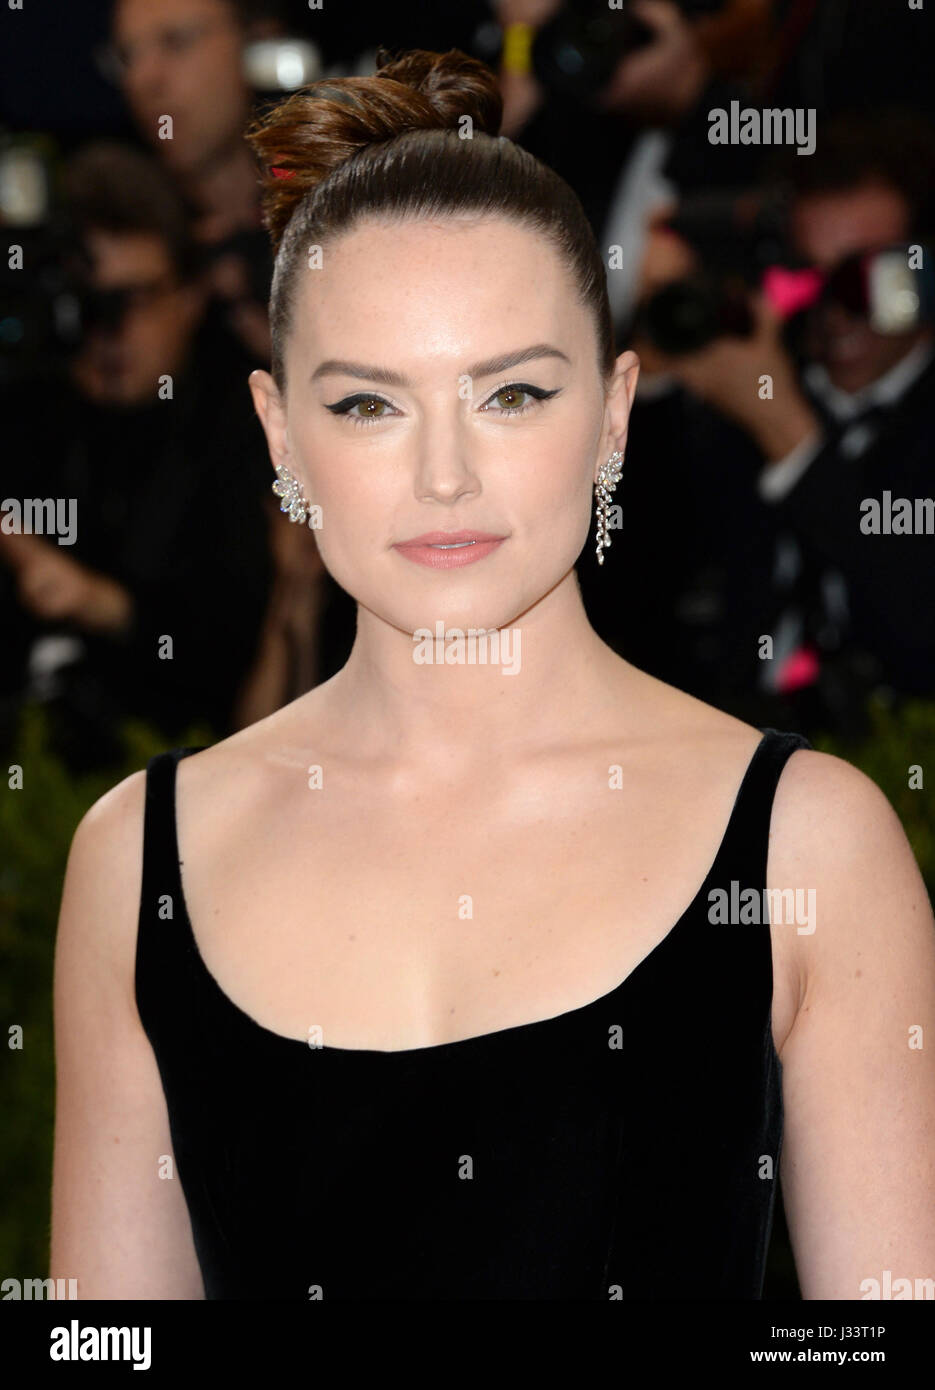 Daisy Ridley attending The Metropolitan Museum of Art Costume Institute Benefit Gala 2017, in New York, USA. PRESS ASSOCIATION Photo. Picture date: Monday 1st May, 2017. See PA Story SHOWBIZ Gala. Photo credit should read: Aurore Marechal/PA Wire Stock Photo